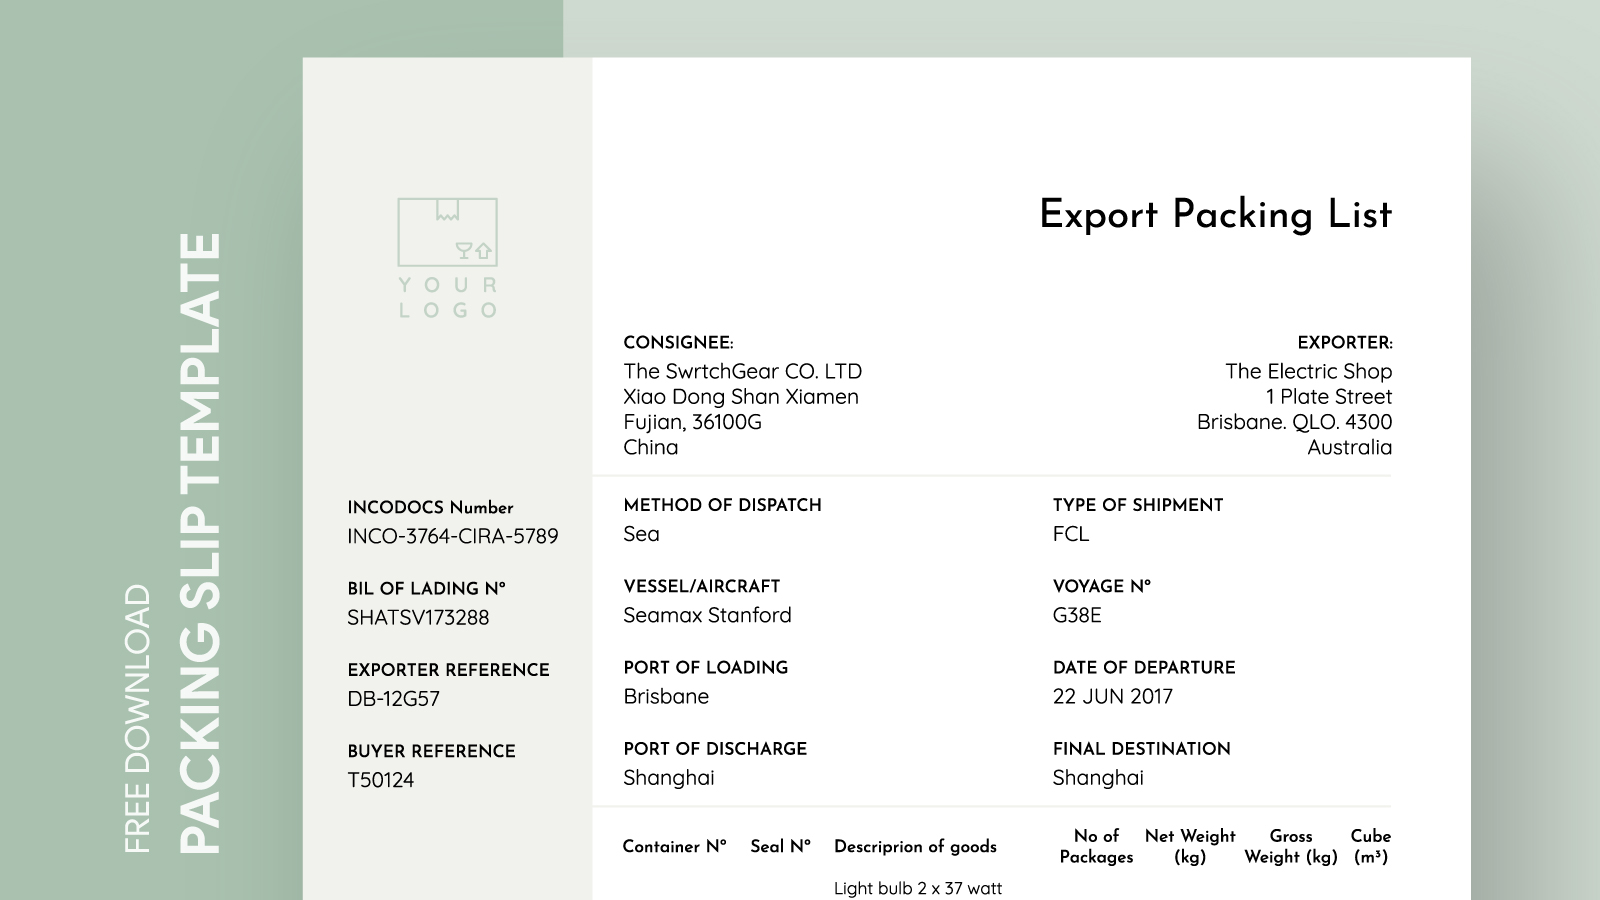 export-packing-list-free-google-docs-template-gdoc-io